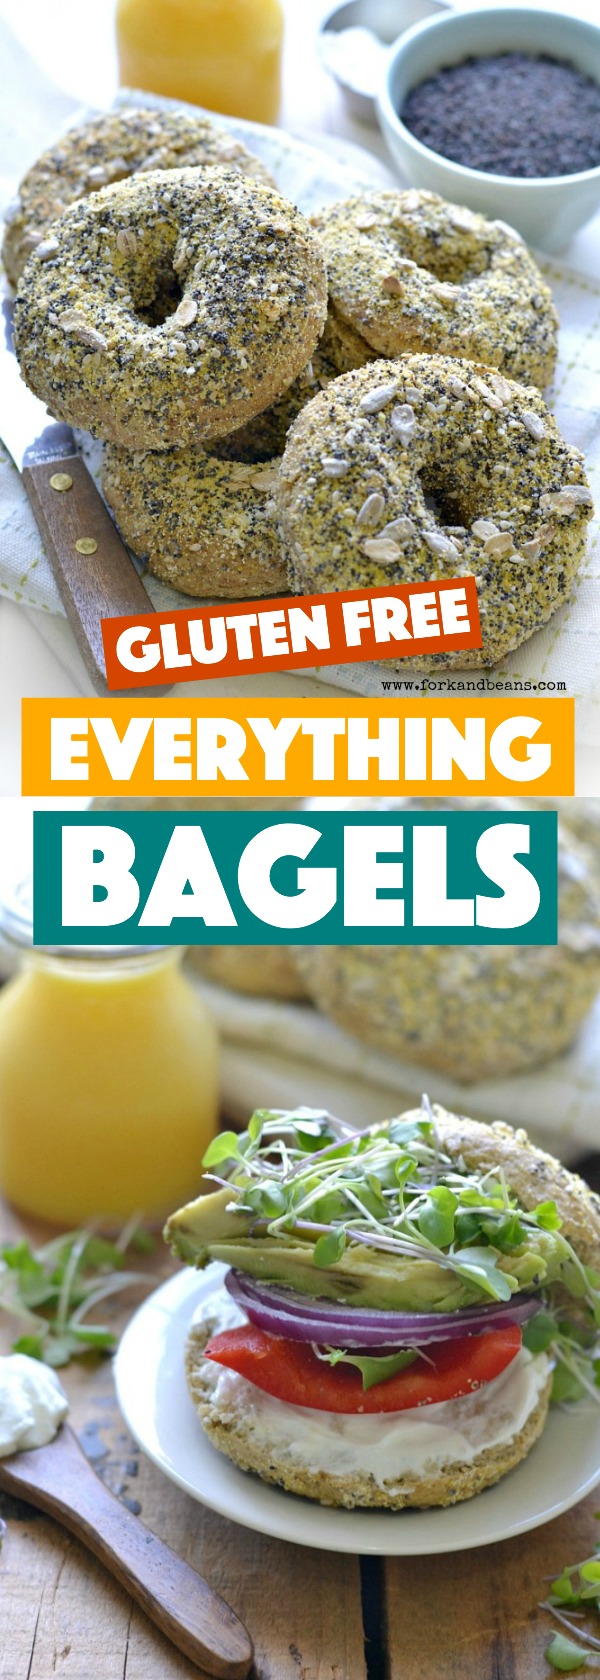 Gluten Free Vegan Everything Bagels - Fork and Beans